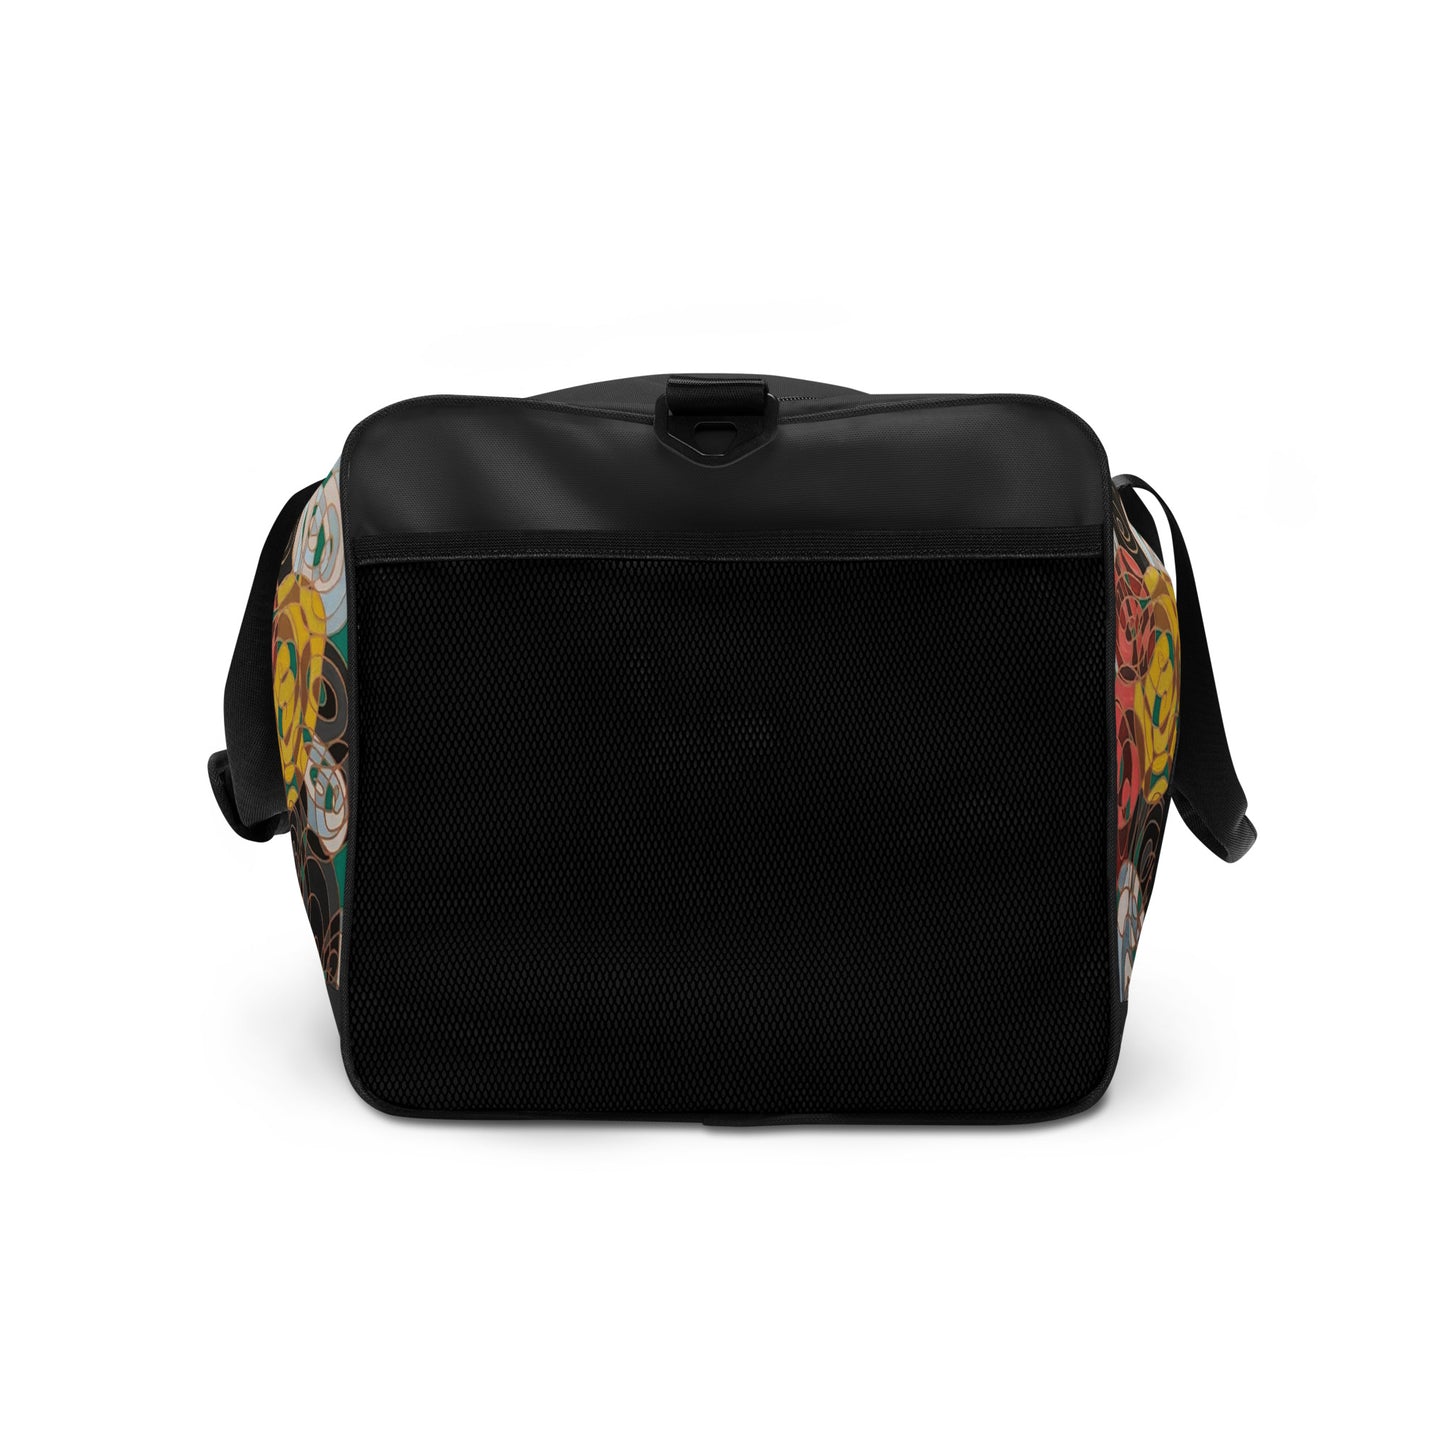 Red and Yellow, Black and White Duffle bag